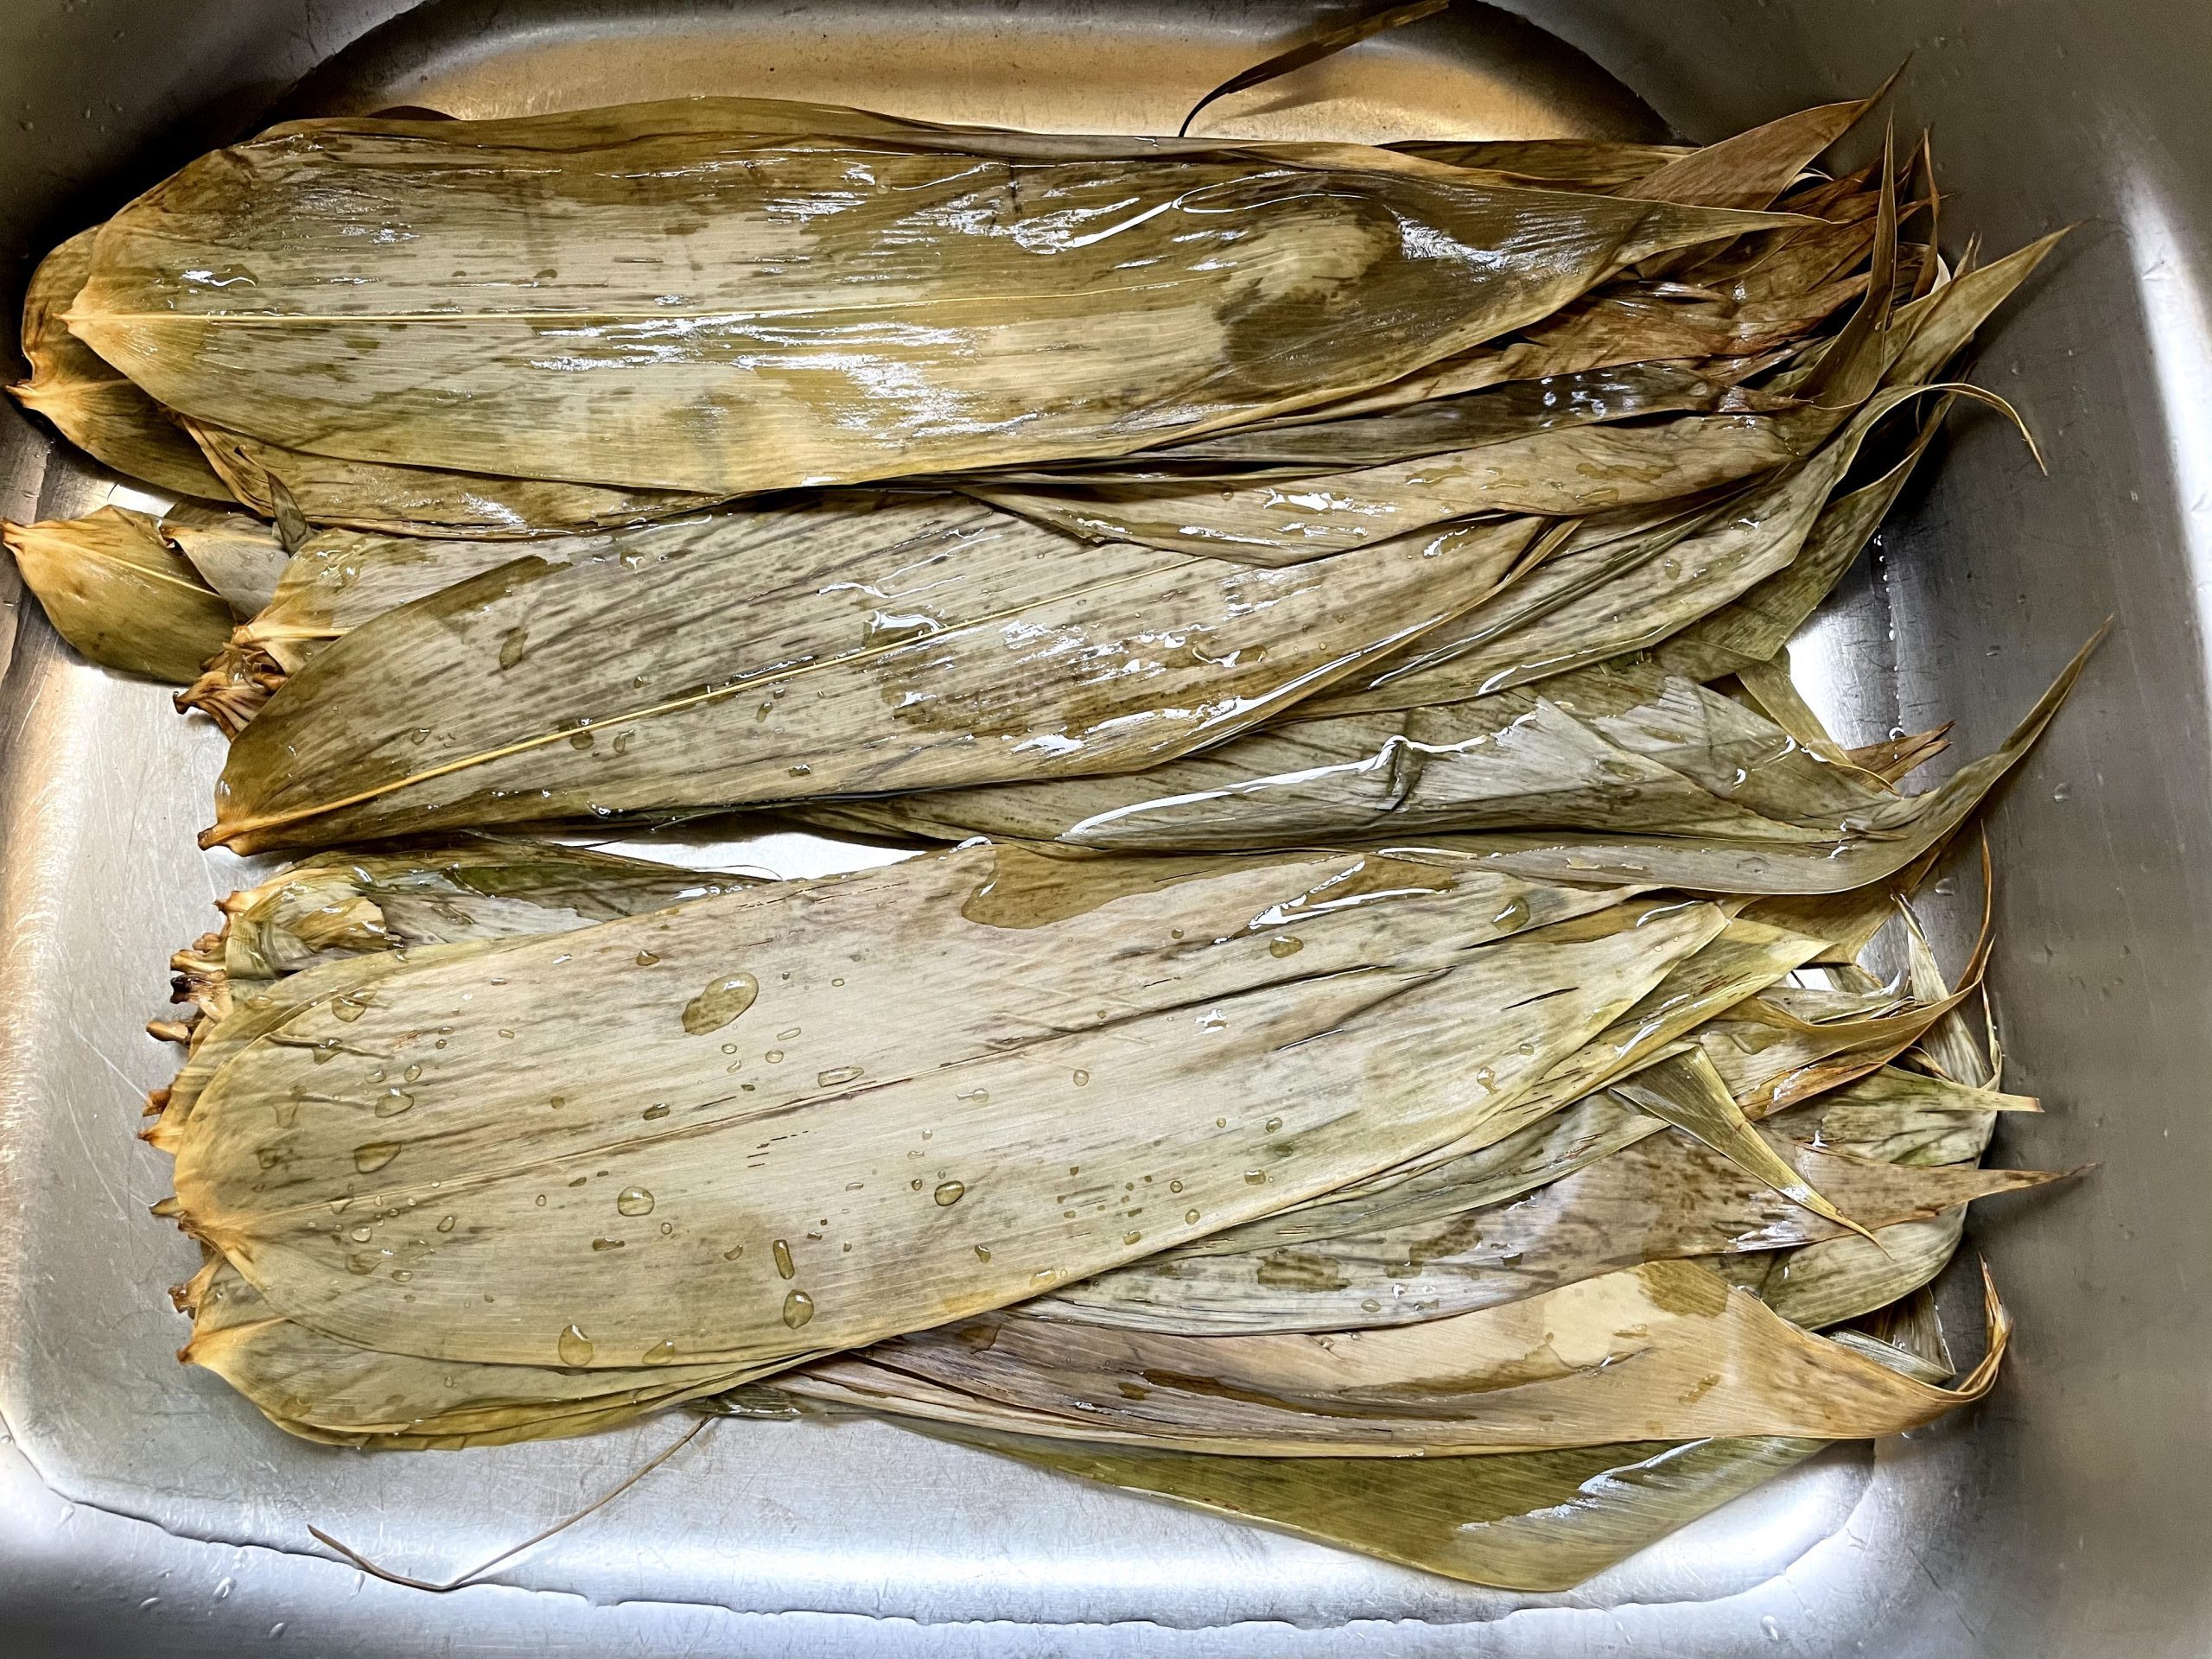 Clean and soak bamboo leaves overnight.